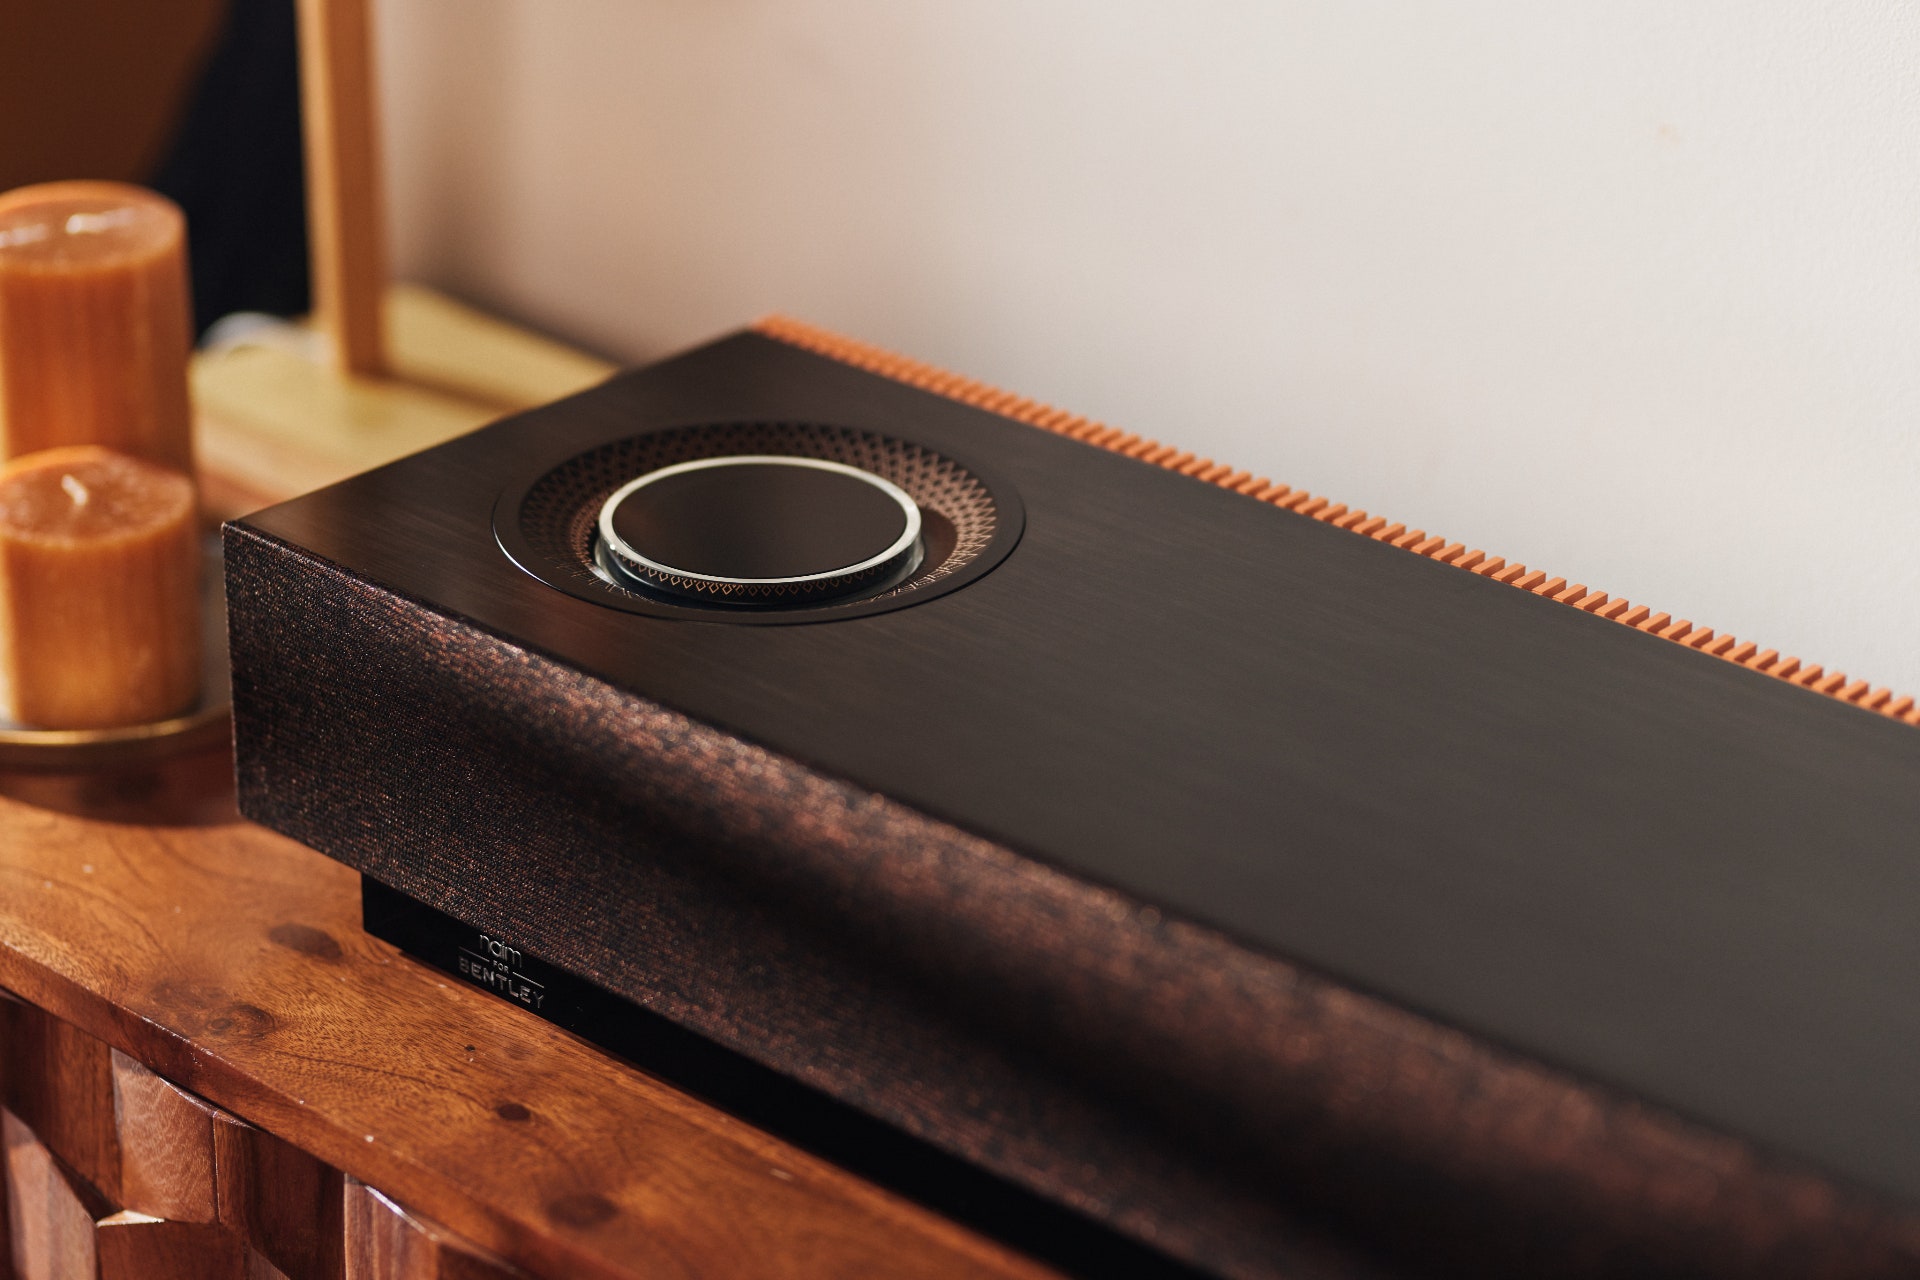 Naim Mu-so for Bentley Special Edition